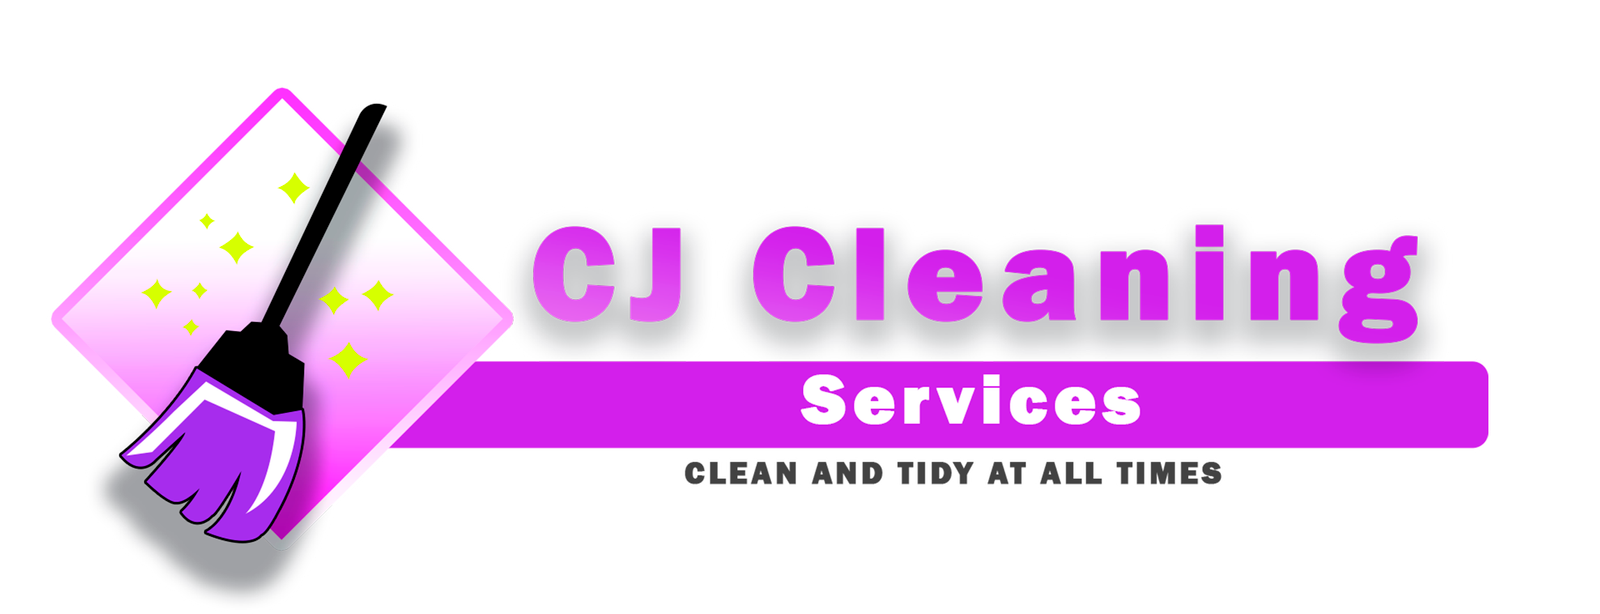 CJ Cleaning Services